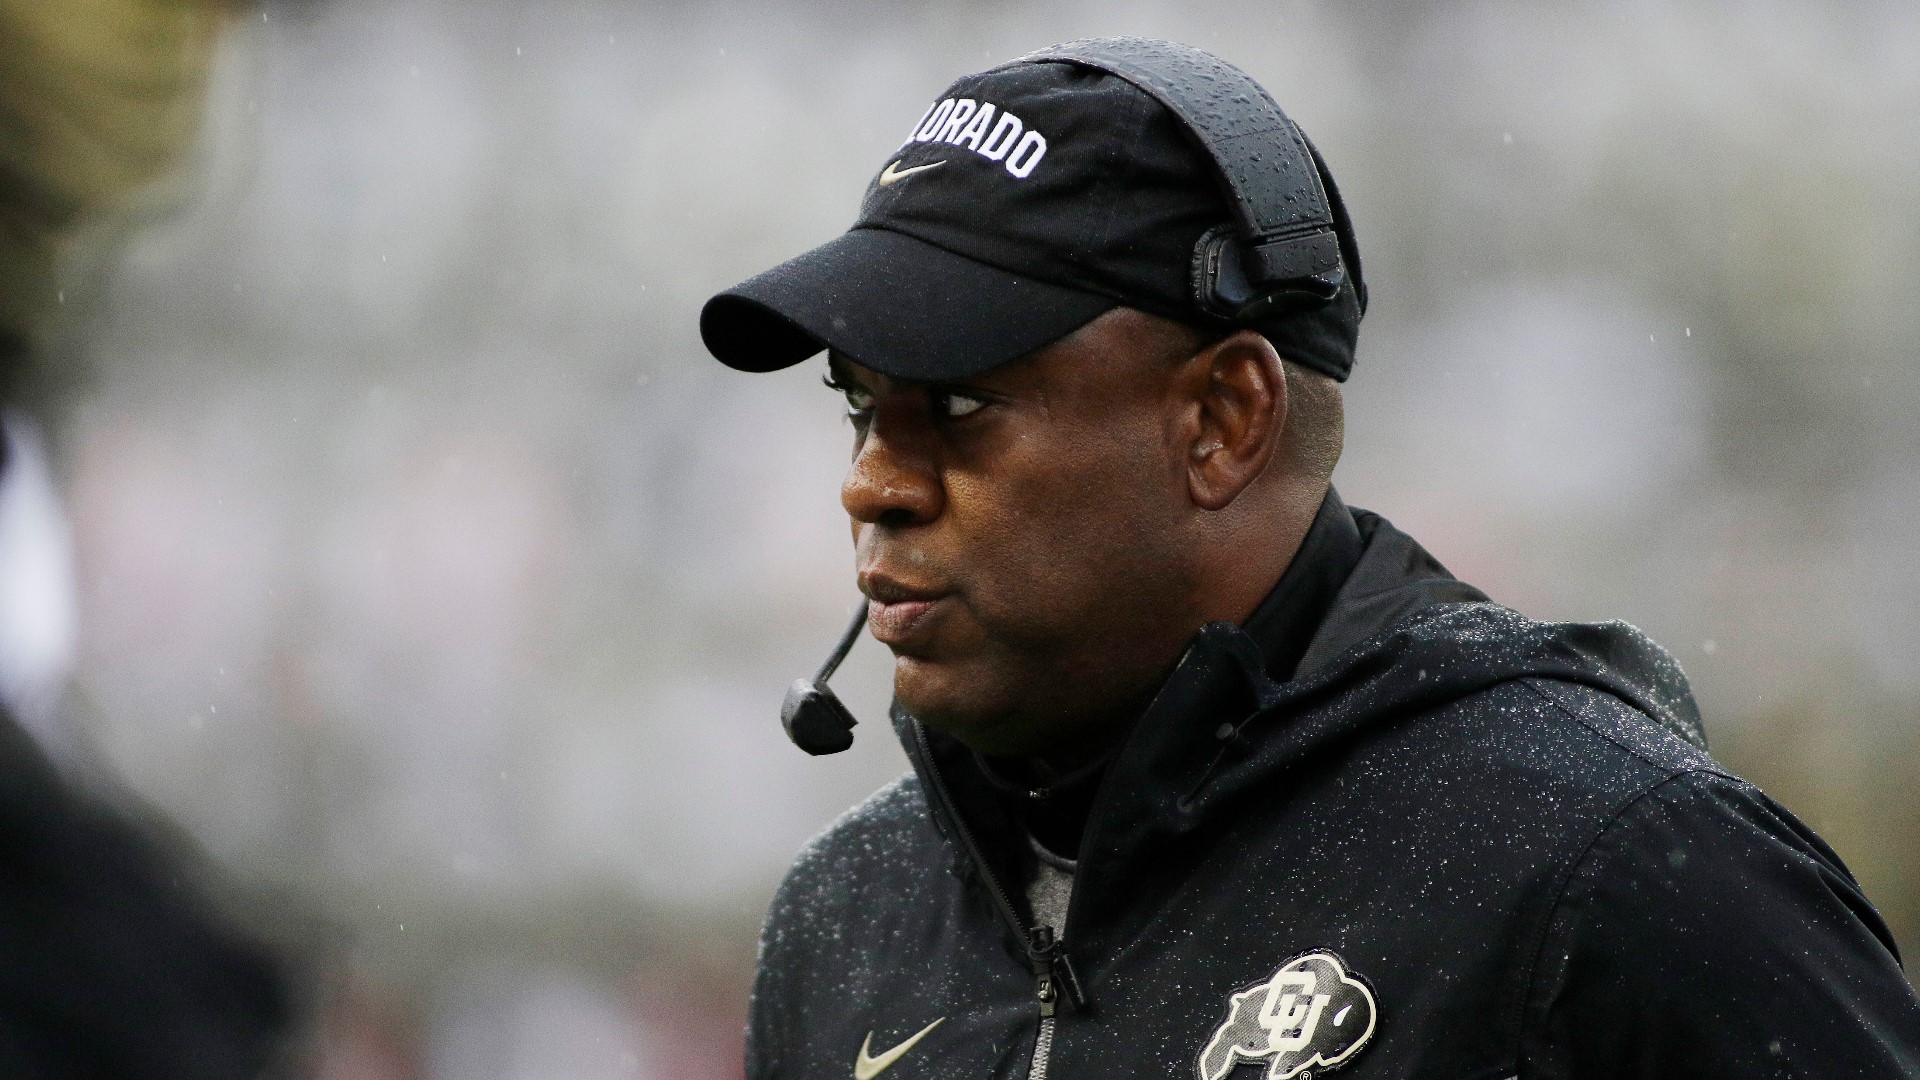 A behind-the-scenes look at the daily routine of the CU Buffs' head football coach.